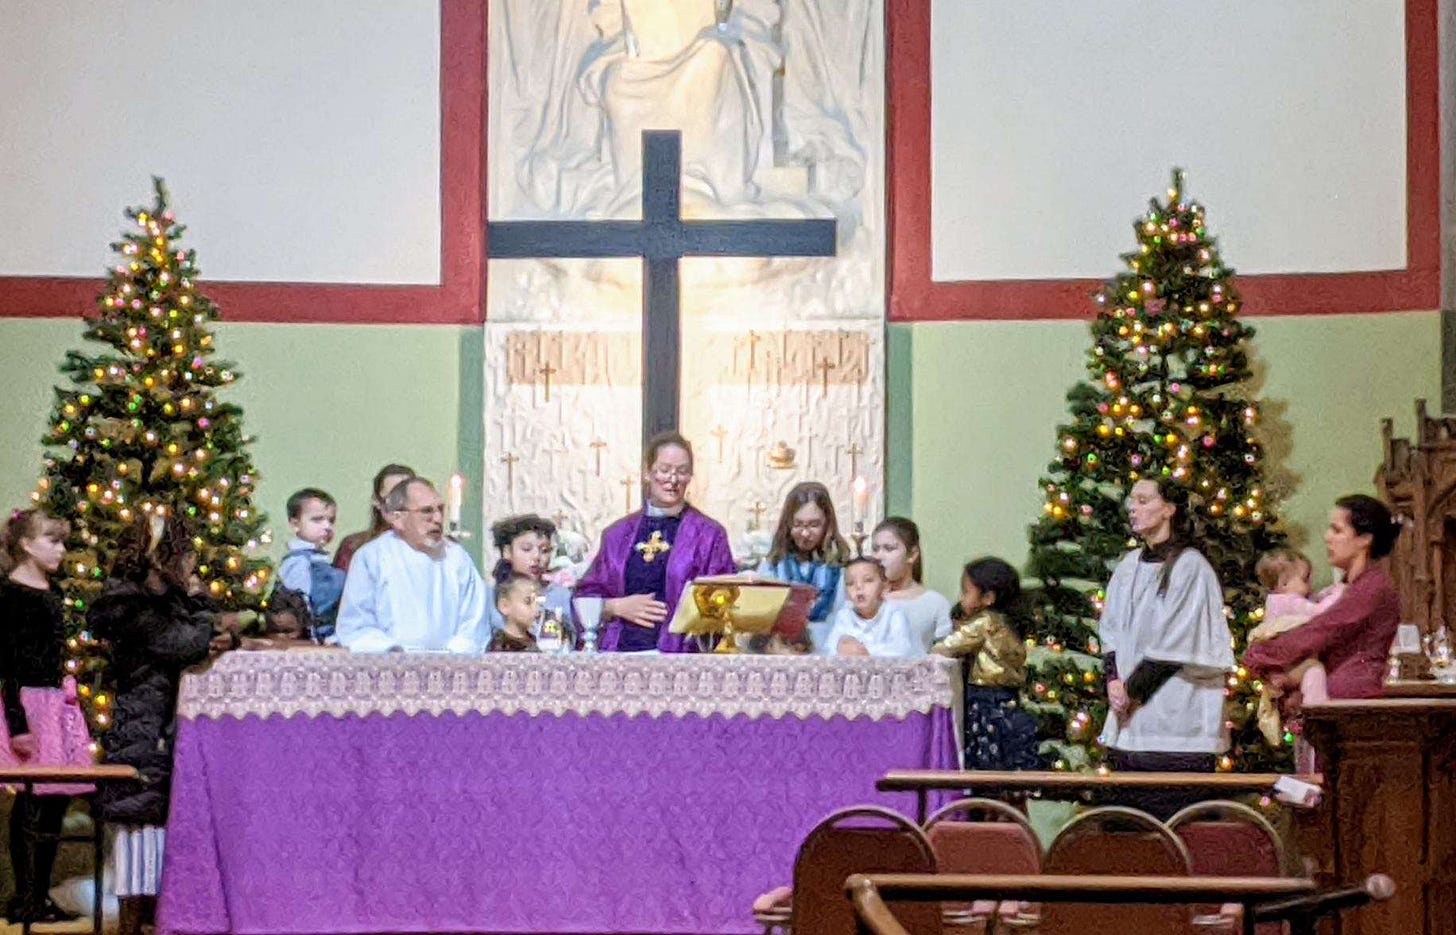 Children gather around an altar prepared in purple for Advent as the priest leads the Eucharist liturgy